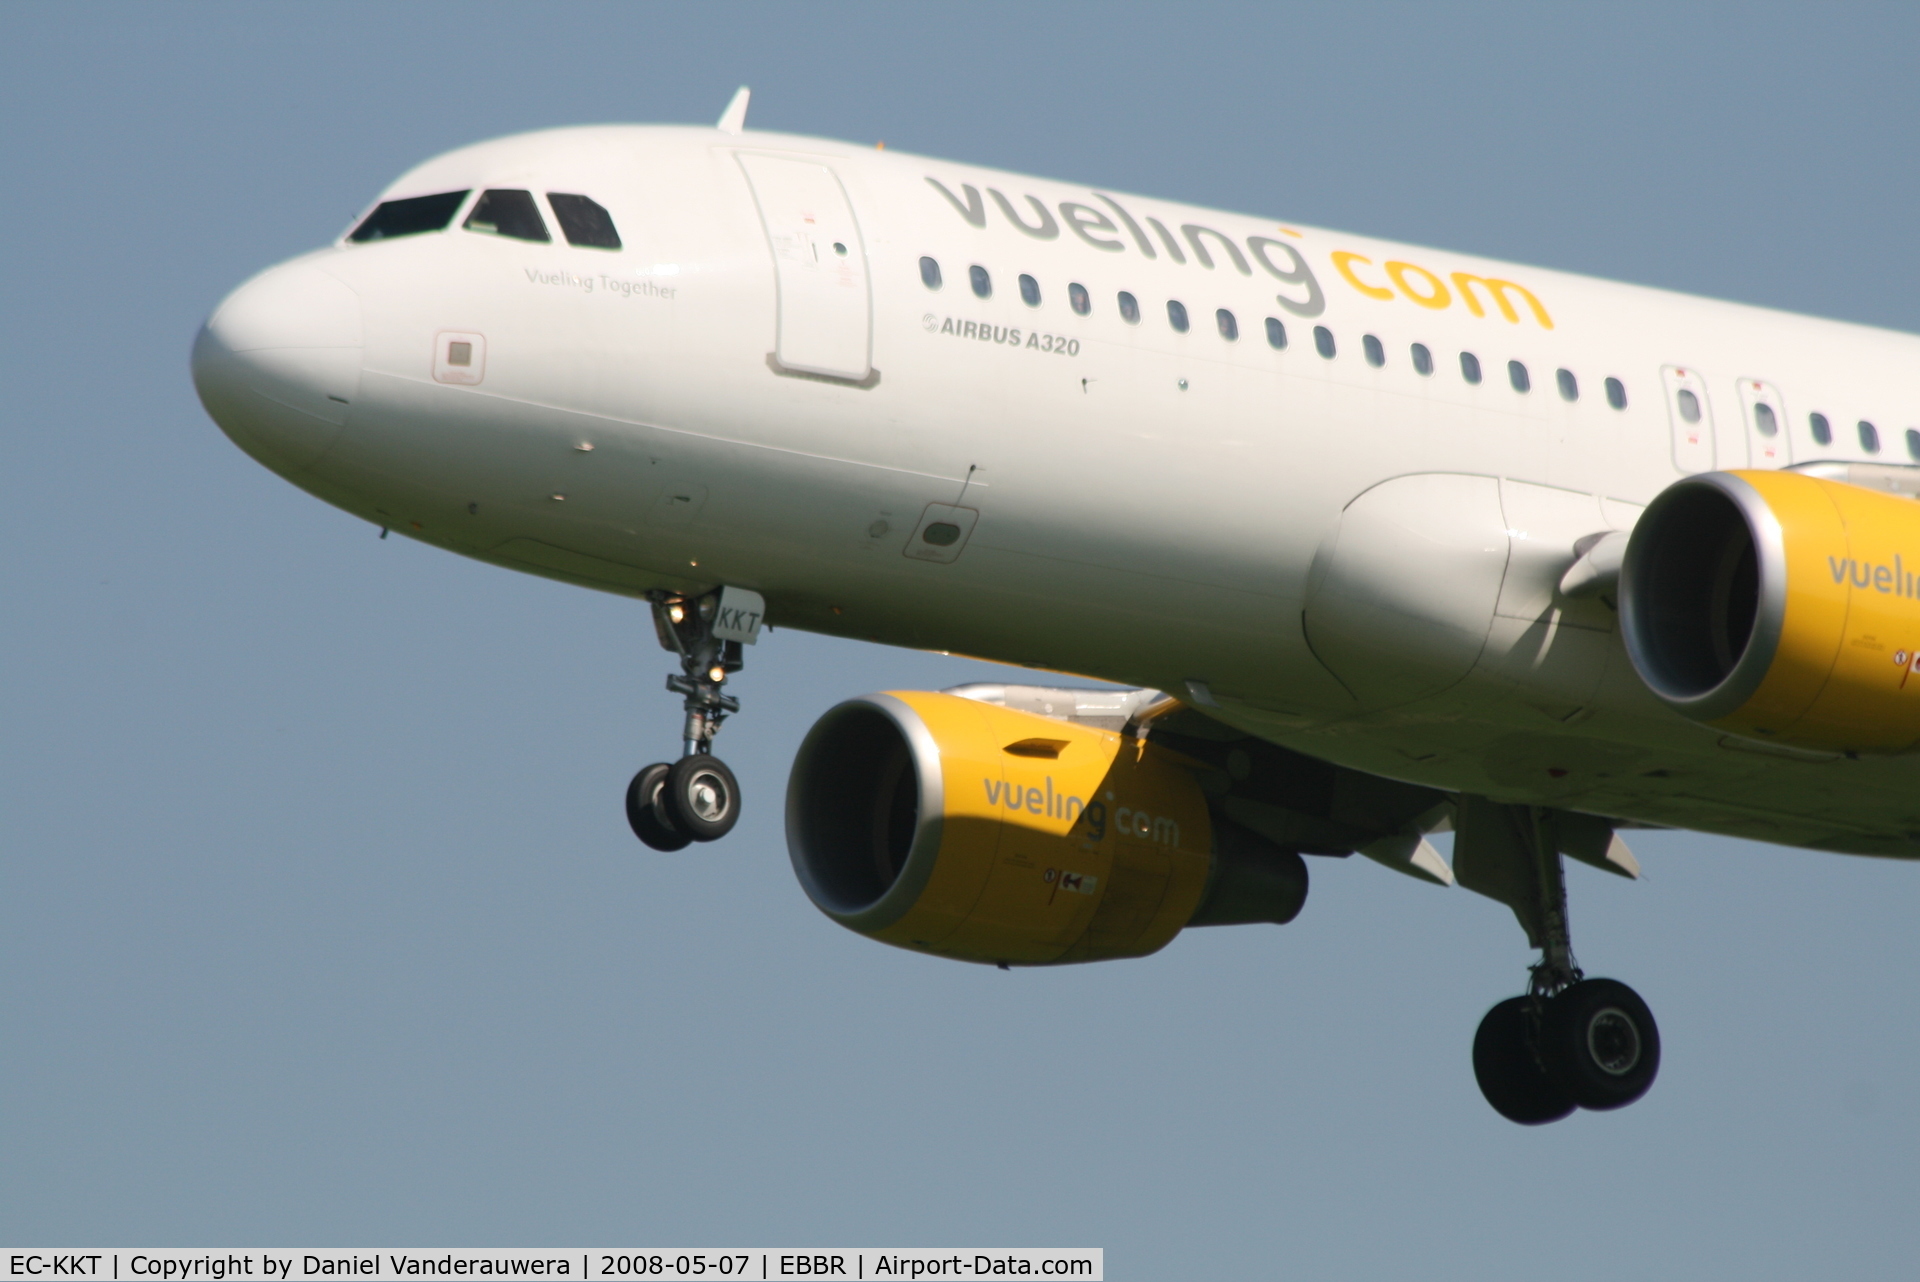 EC-KKT, 2007 Airbus A320-214 C/N 3293, arrival of flight VY7060 to rwy 25L